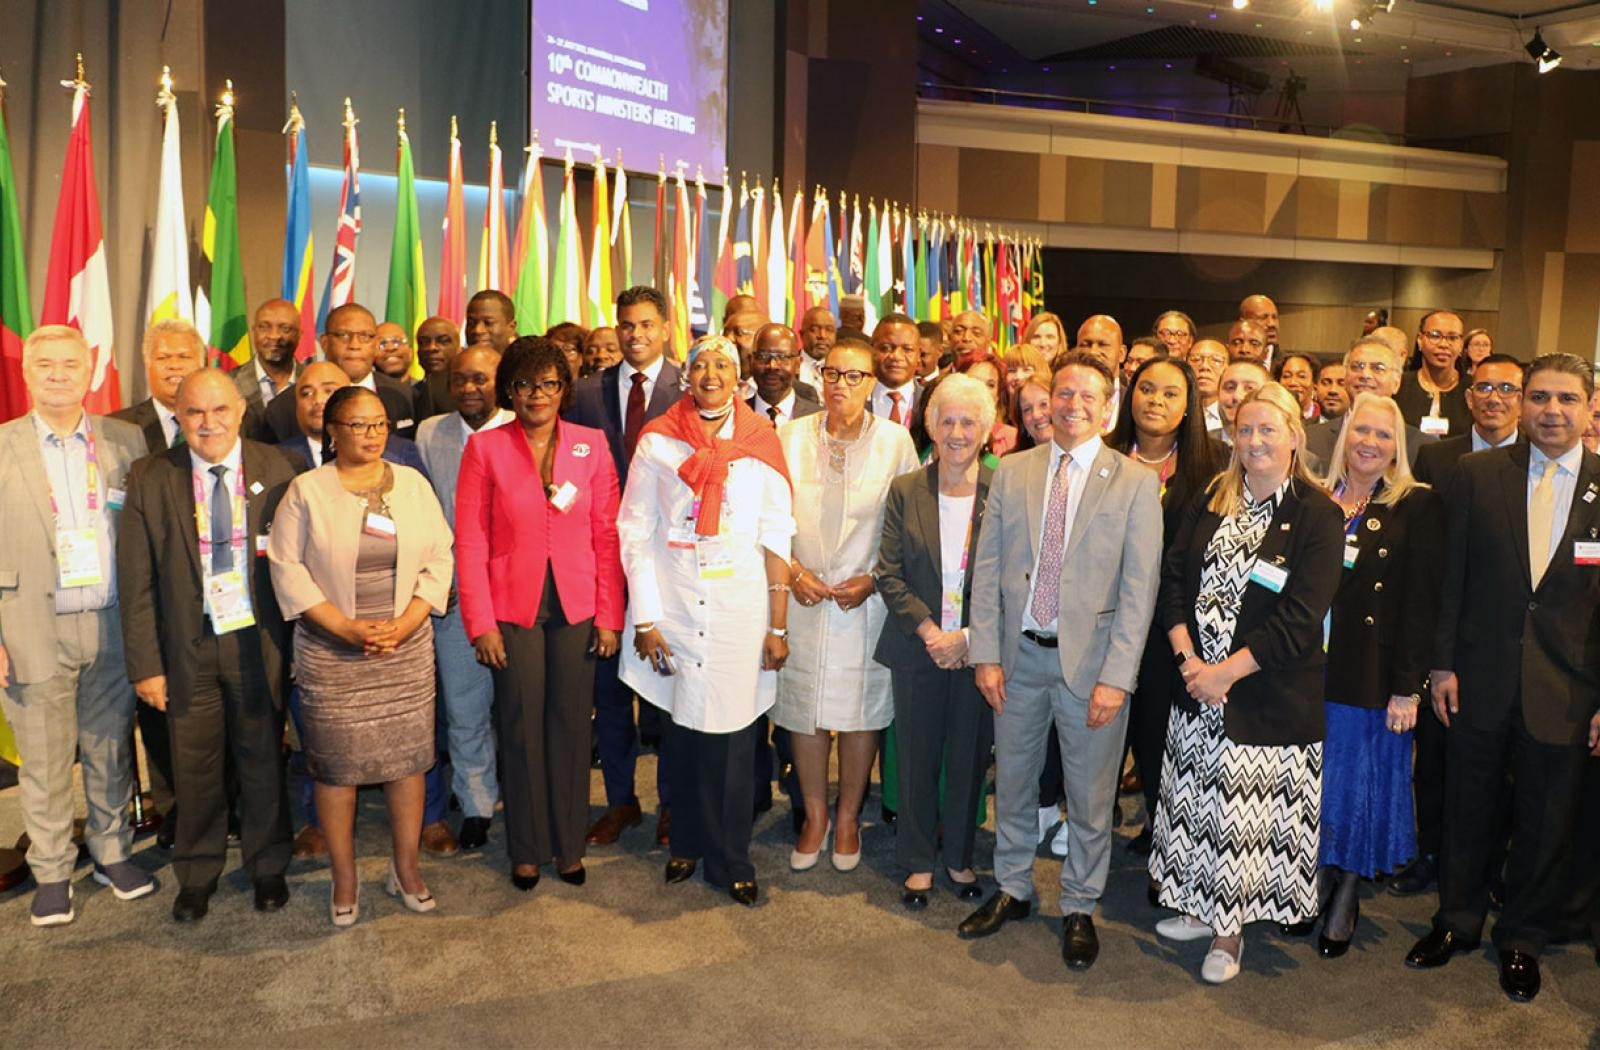 High-ranking officials in the Commonwealth attended a meeting in Birmingham ©Commonwealth